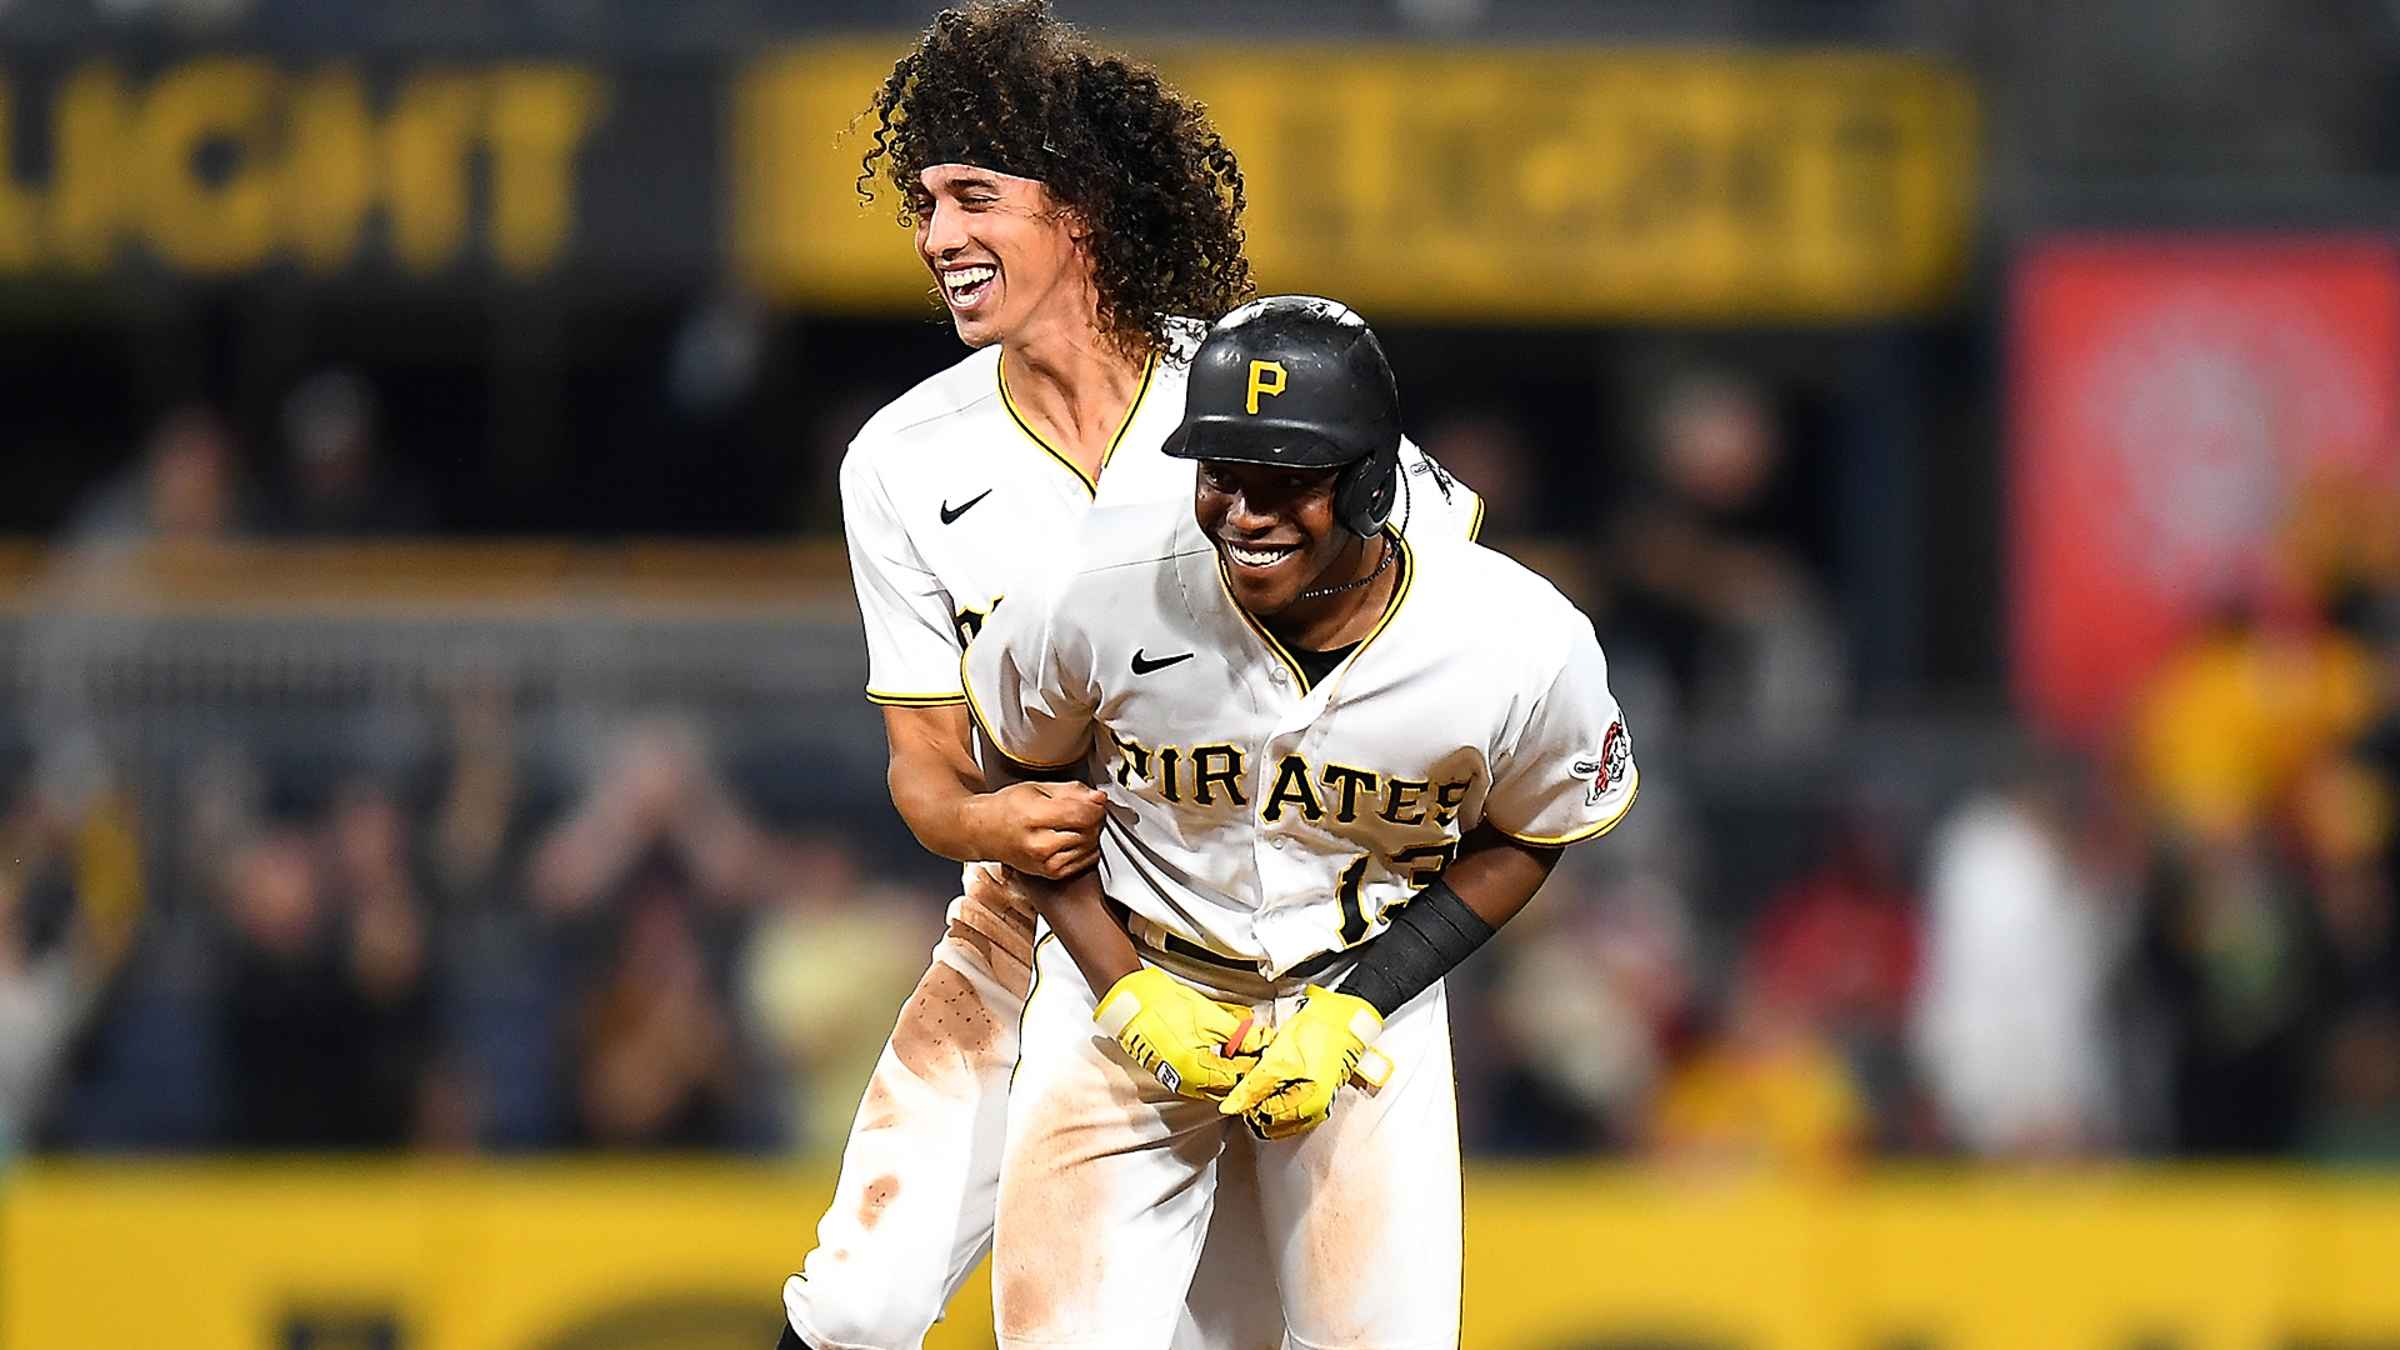 Josh Bell homers in Pittsburgh, 09/10/2021